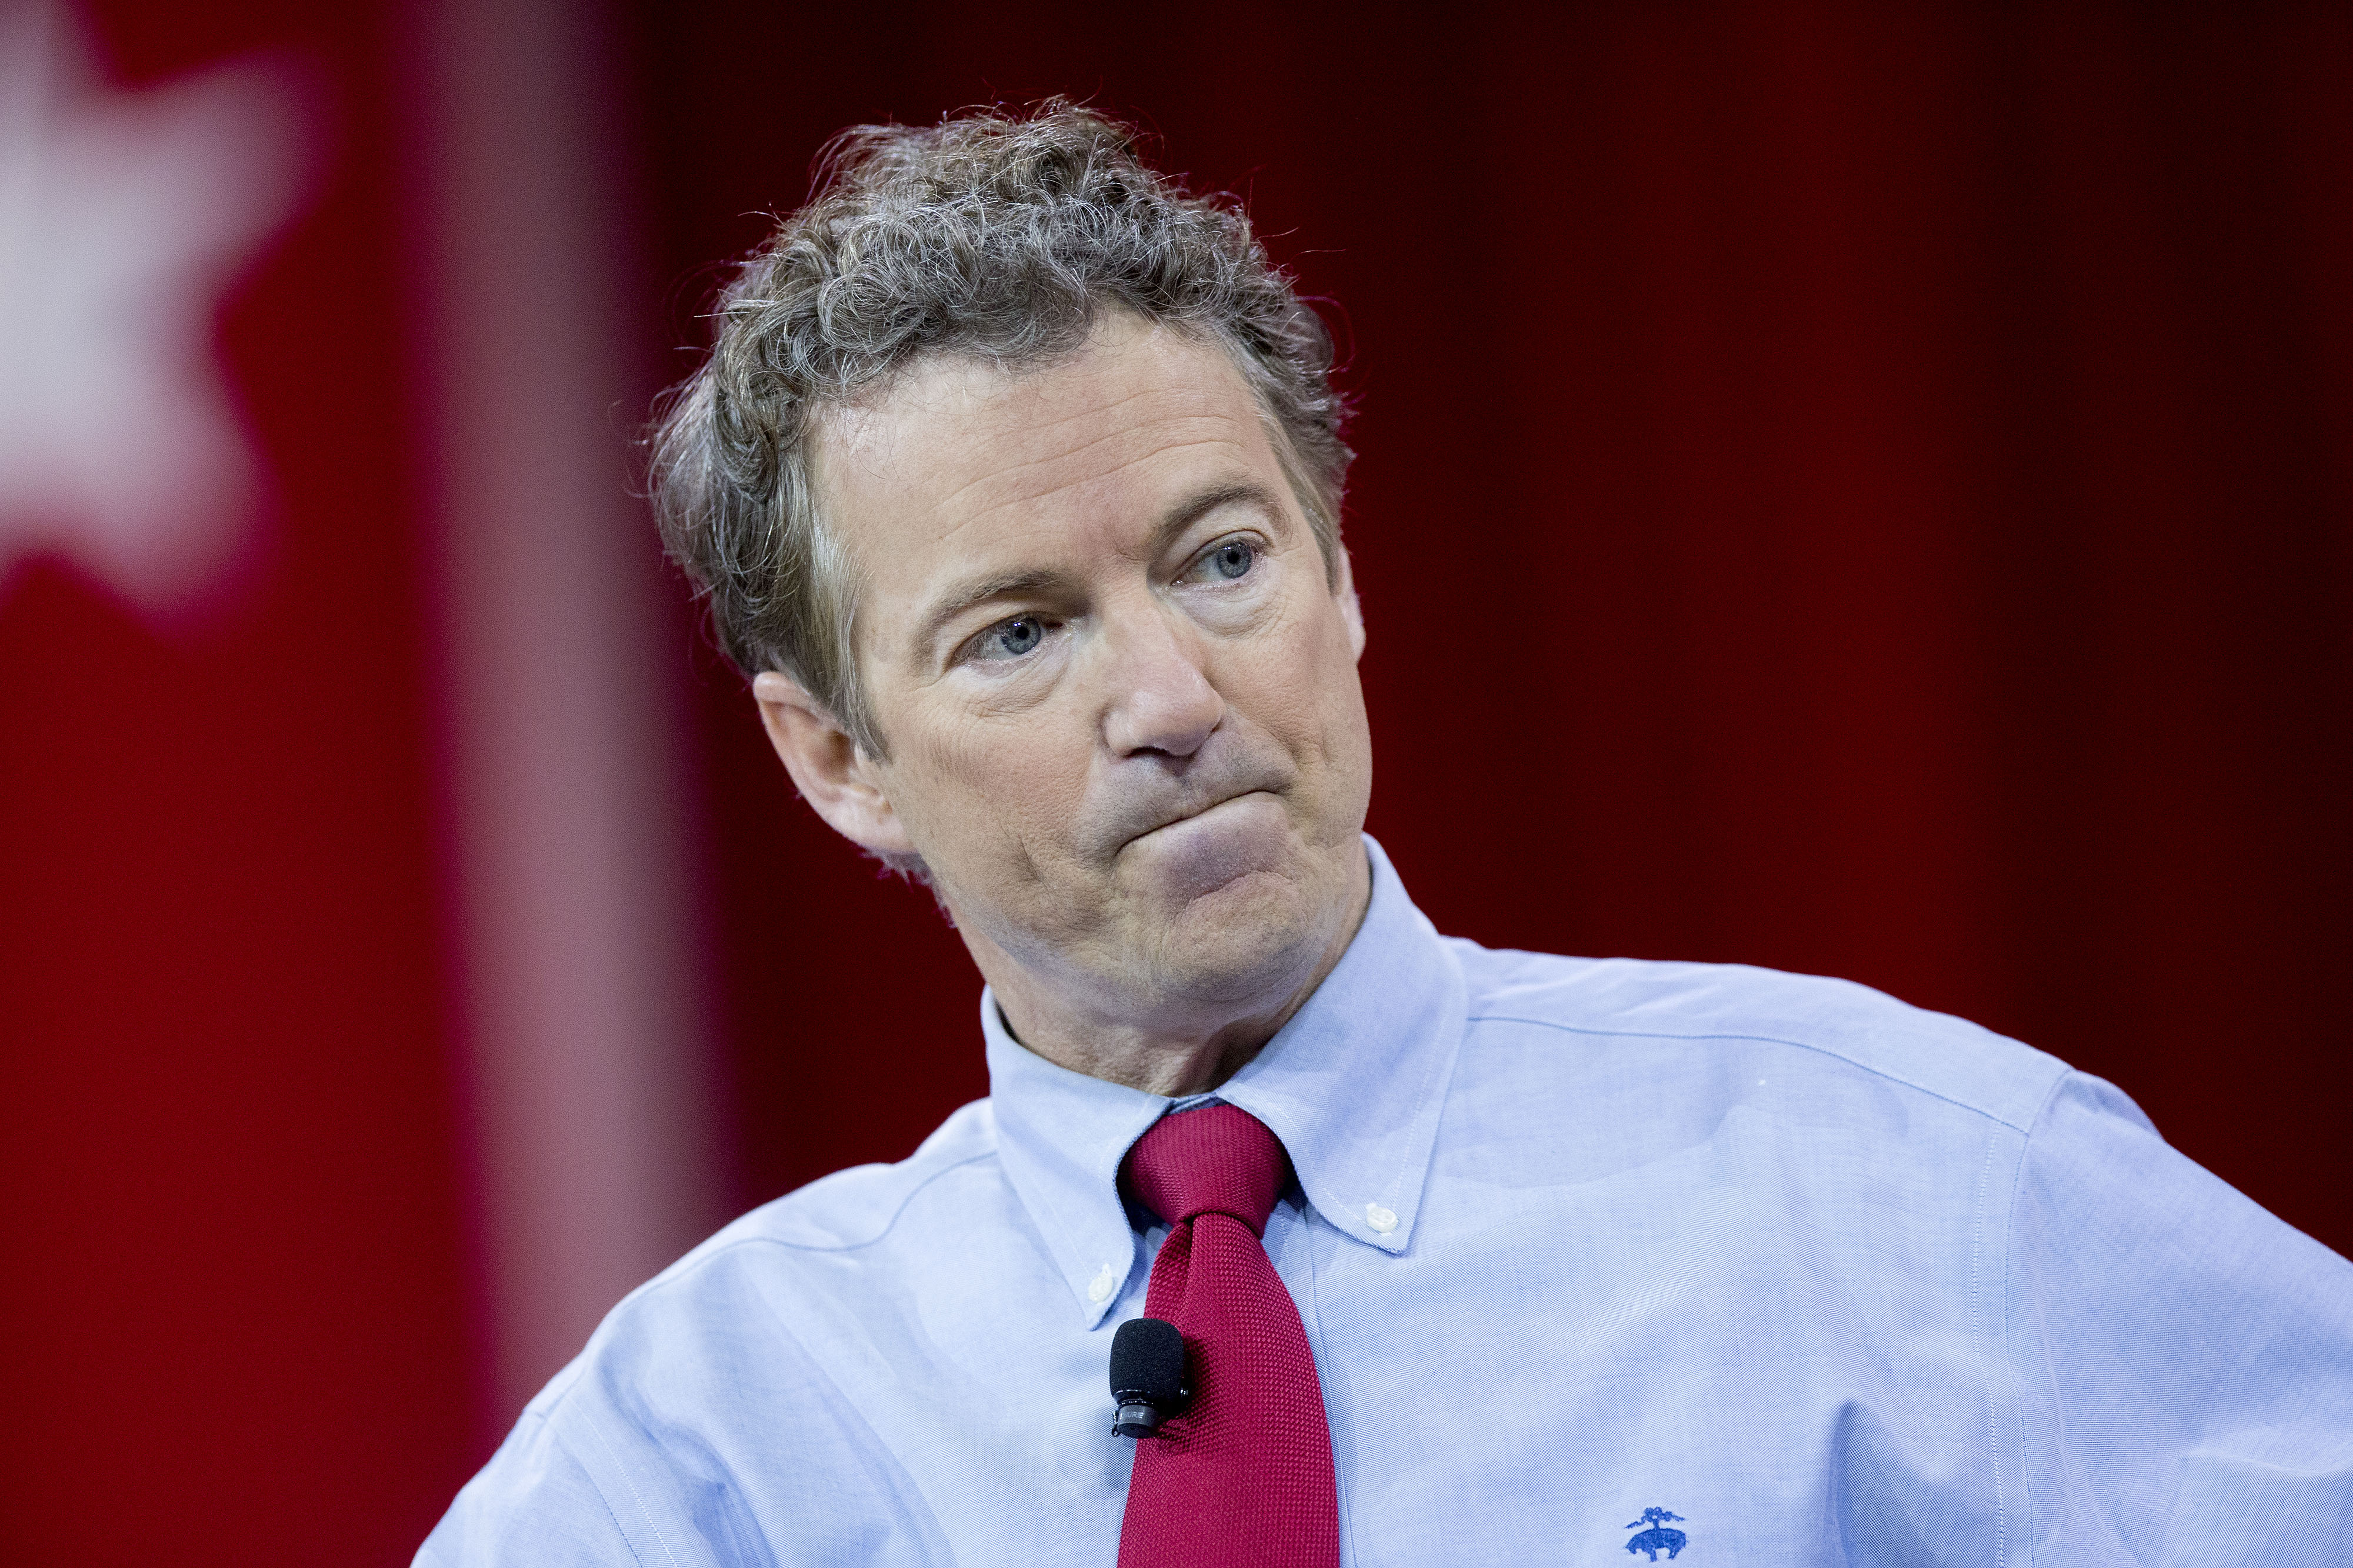 Senator Rand Paul, a Republican from Kentucky, listens to a question during an interview at the Conservative Political Action Conference (CPAC) in National Harbor, Maryland, Feb. 27, 2015. (Andrew Harrer—Bloomberg/Getty Images)